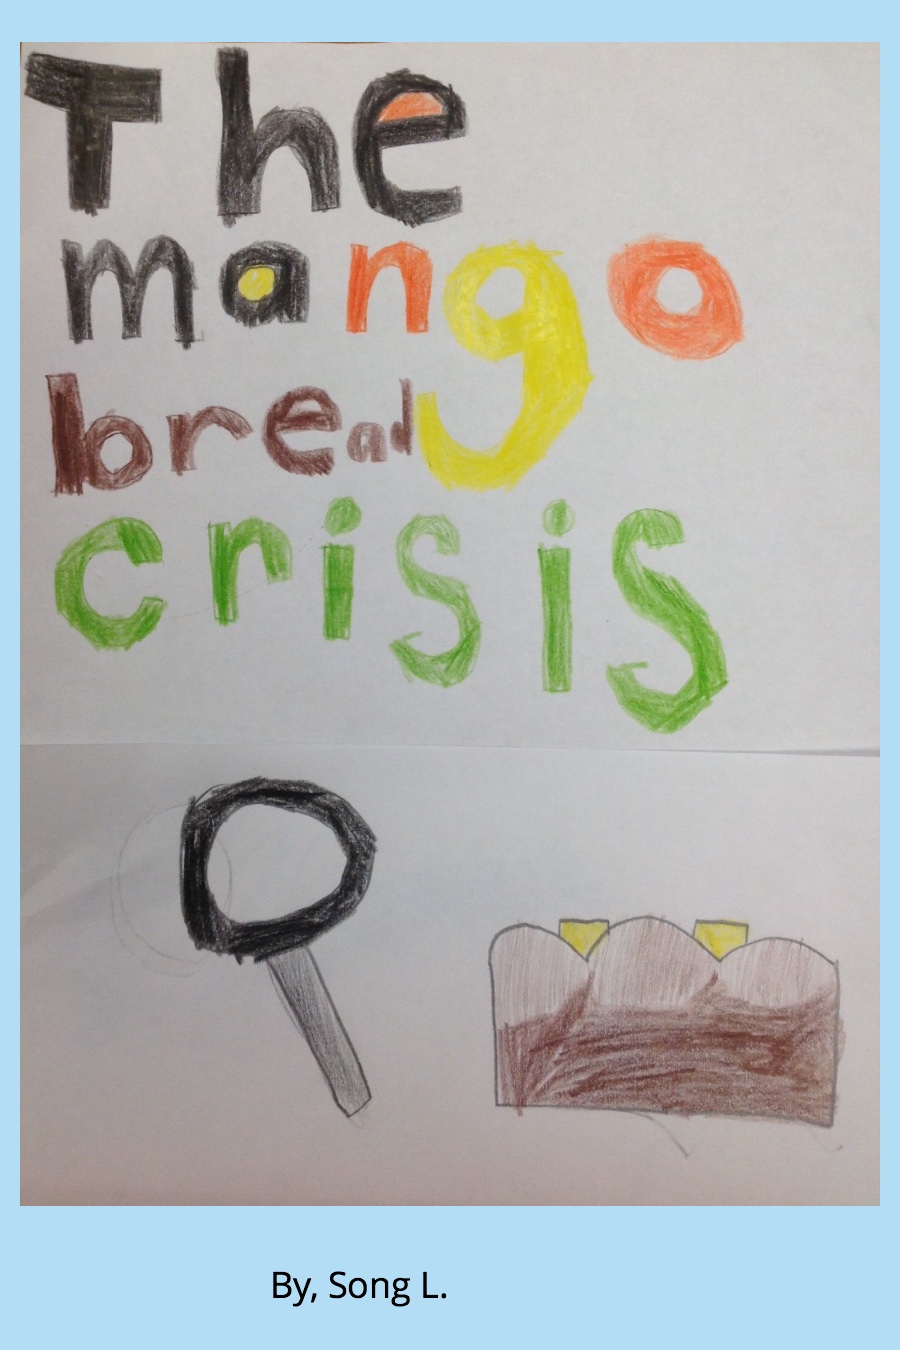 The Mango Bread Crisis by Song L